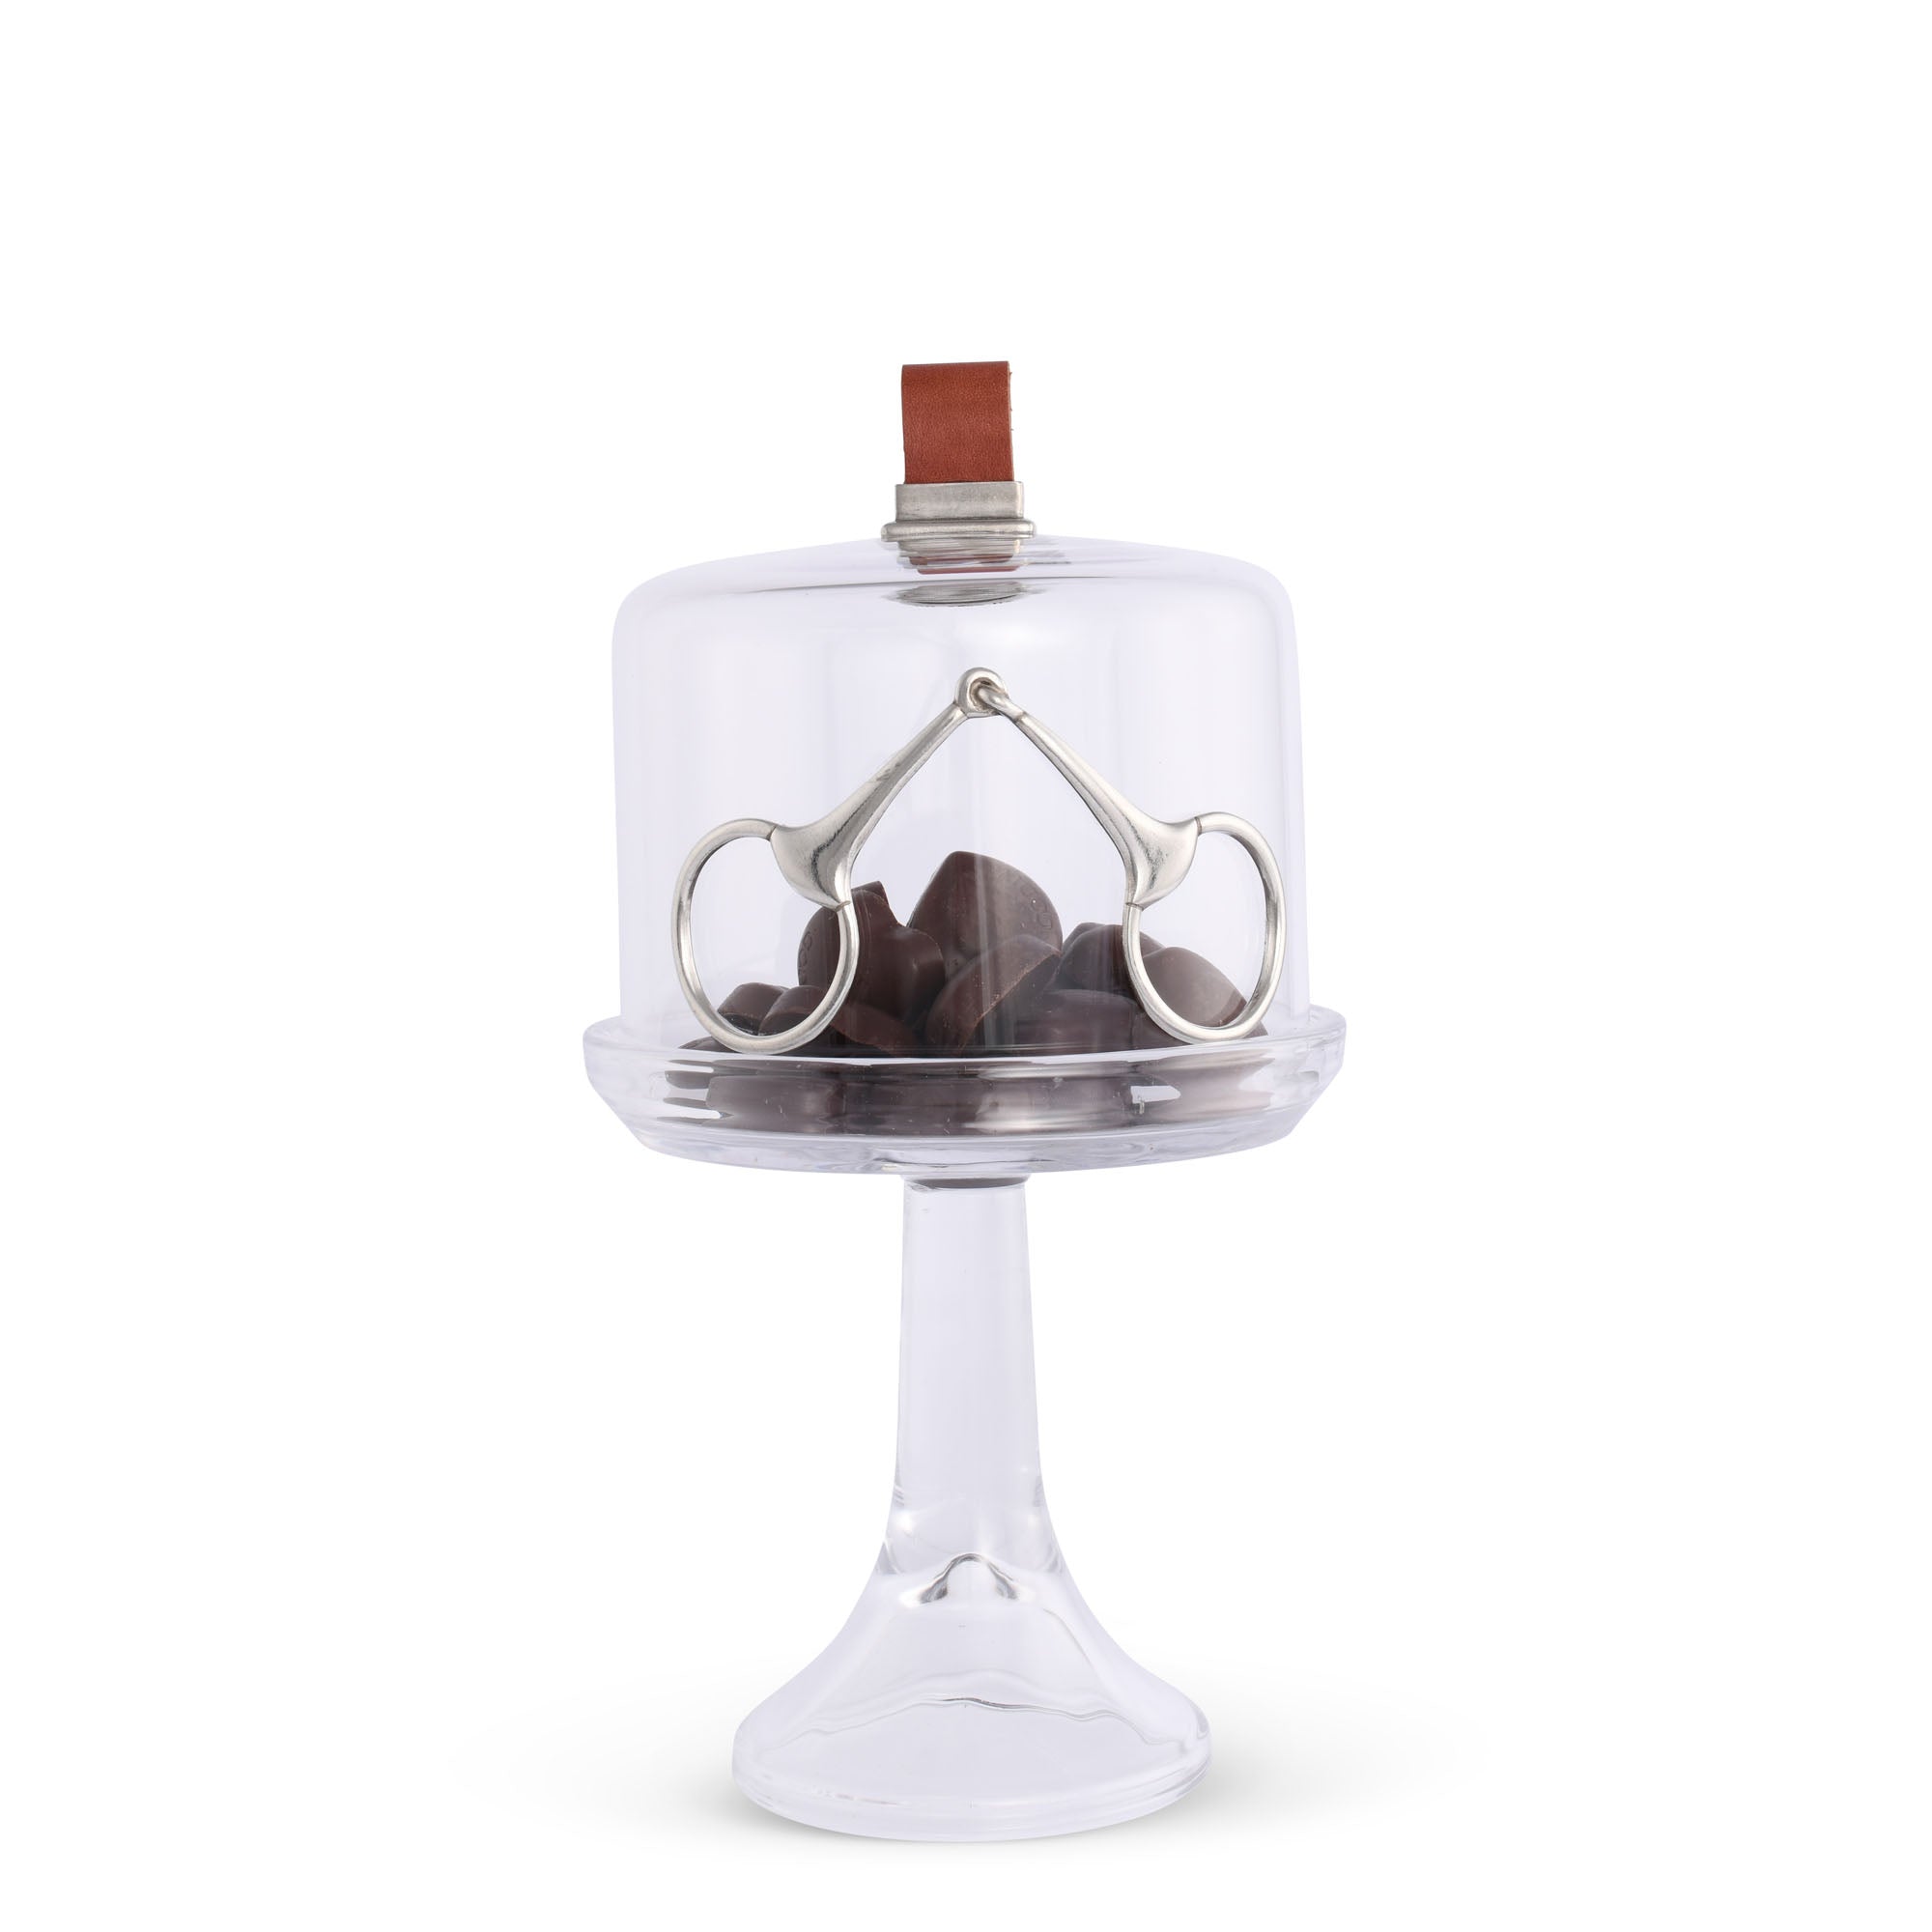 Glass Dome Stand - Tall - Leather Knob Horse Bit  Vagabond House